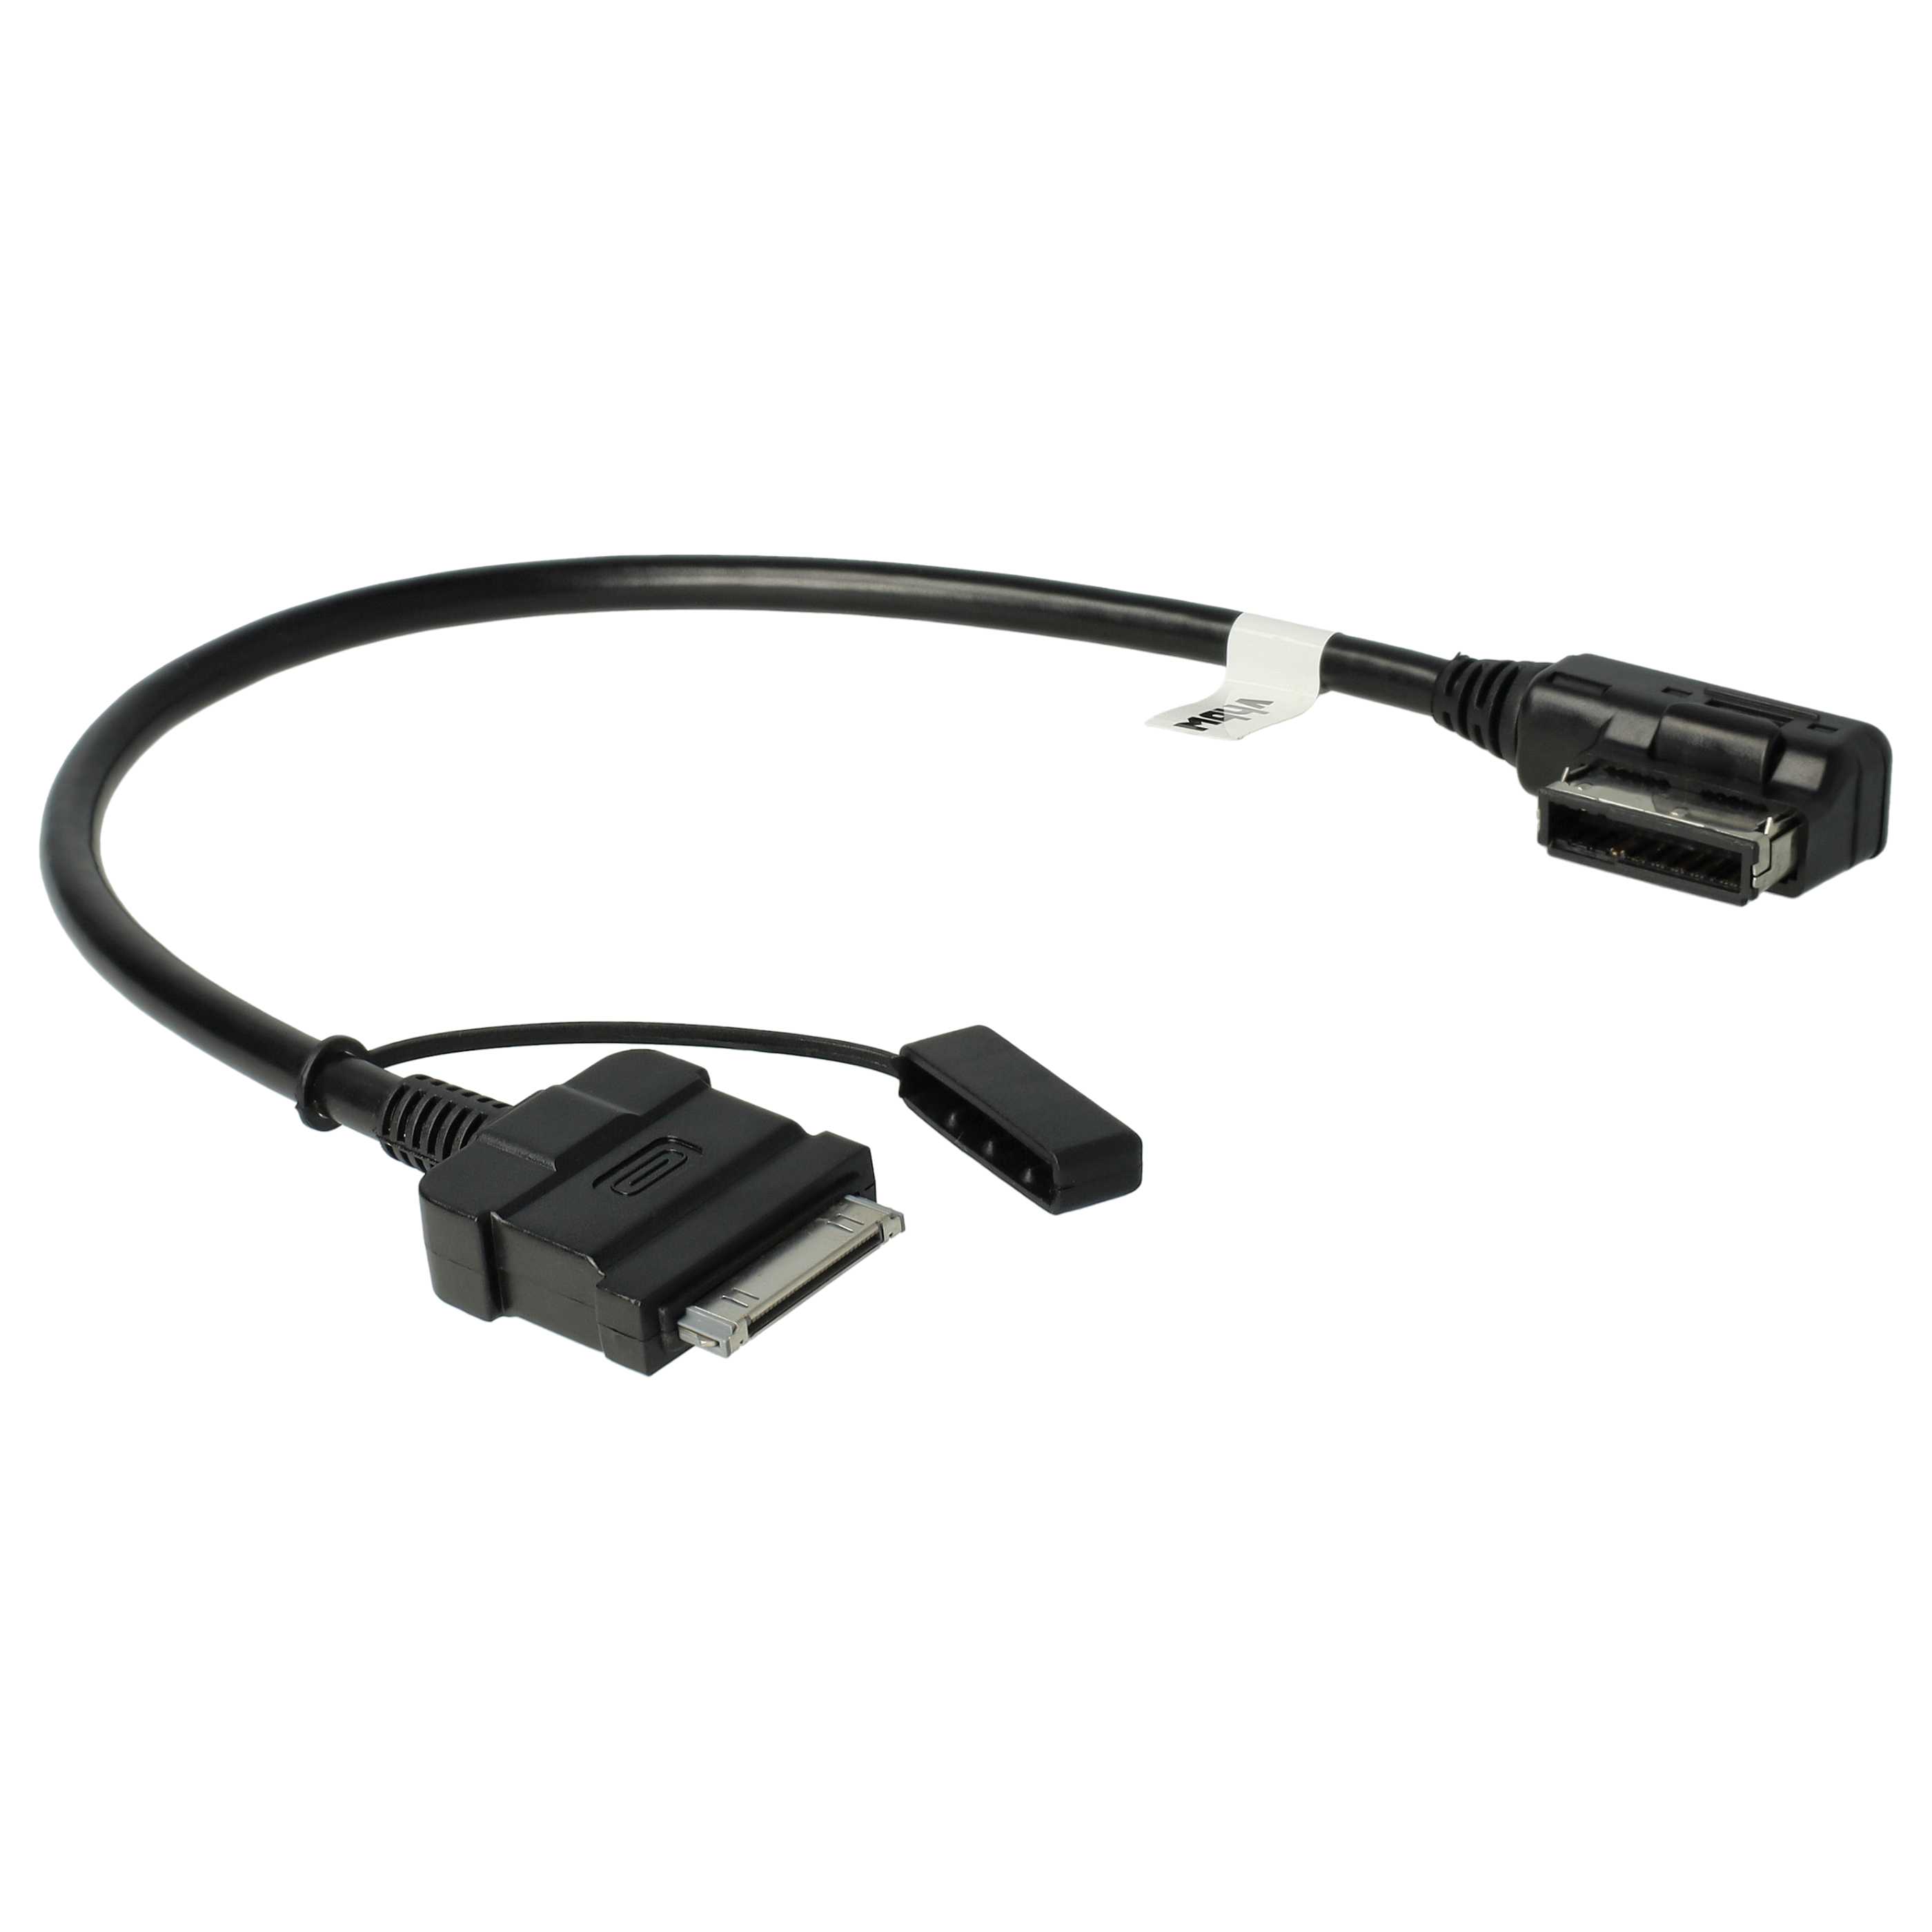 AUX Audio Adapter Cable as Replacement for 5N0035554 Car Radio etc.